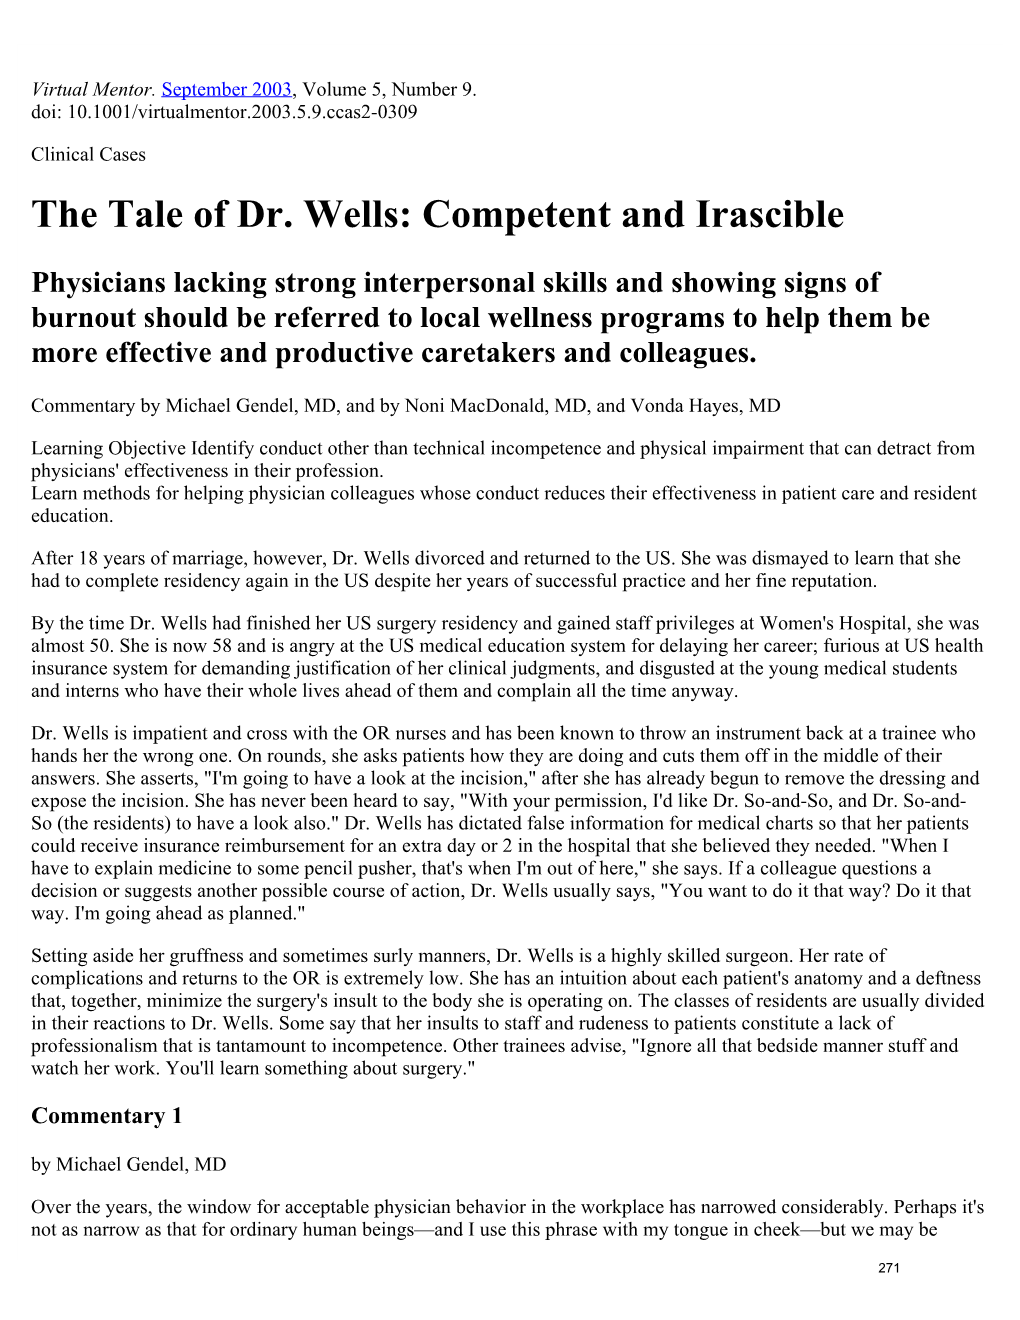 The Tale of Dr. Wells: Competent and Irascible